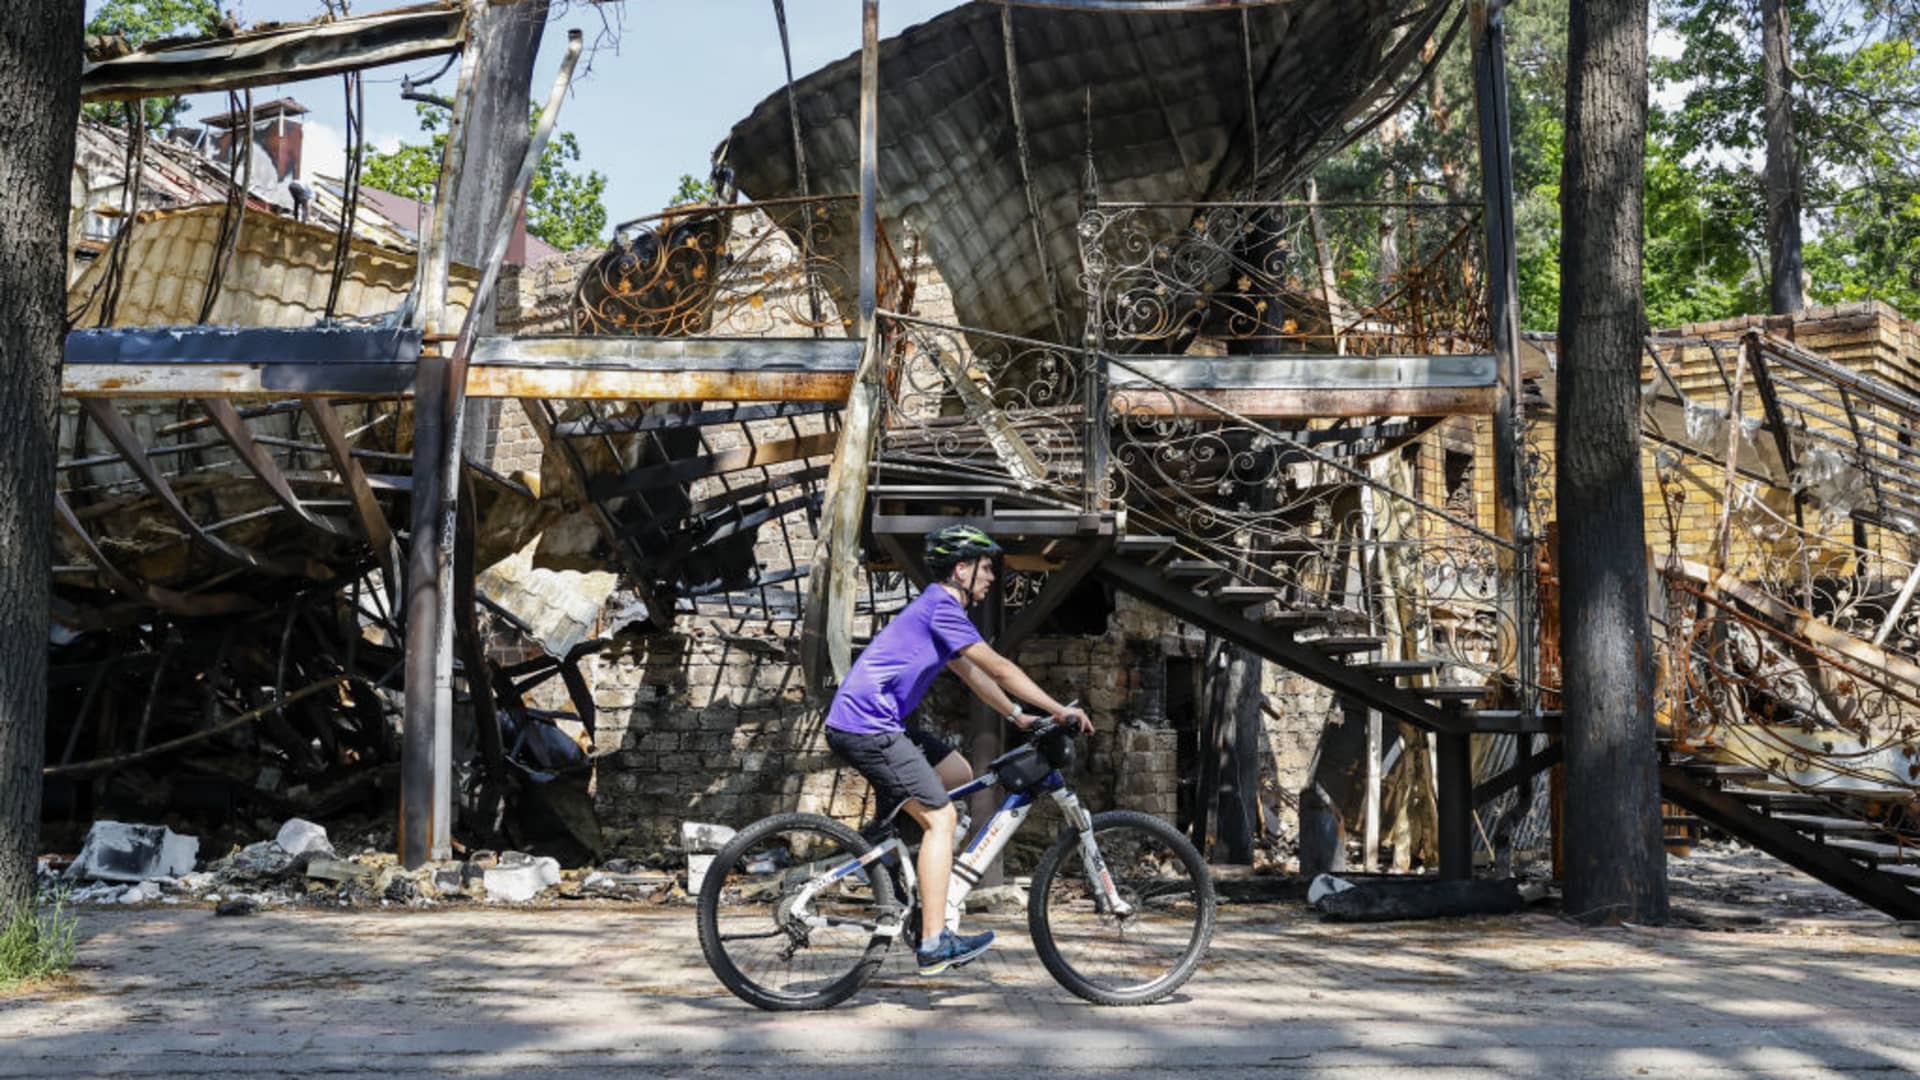 A cyclist rides in front of a collapsed house ahead of the World Bicycle Day in Ukraine's Kyiv Oblast on June 01, 2022 as the Russia-Ukraine war continues.